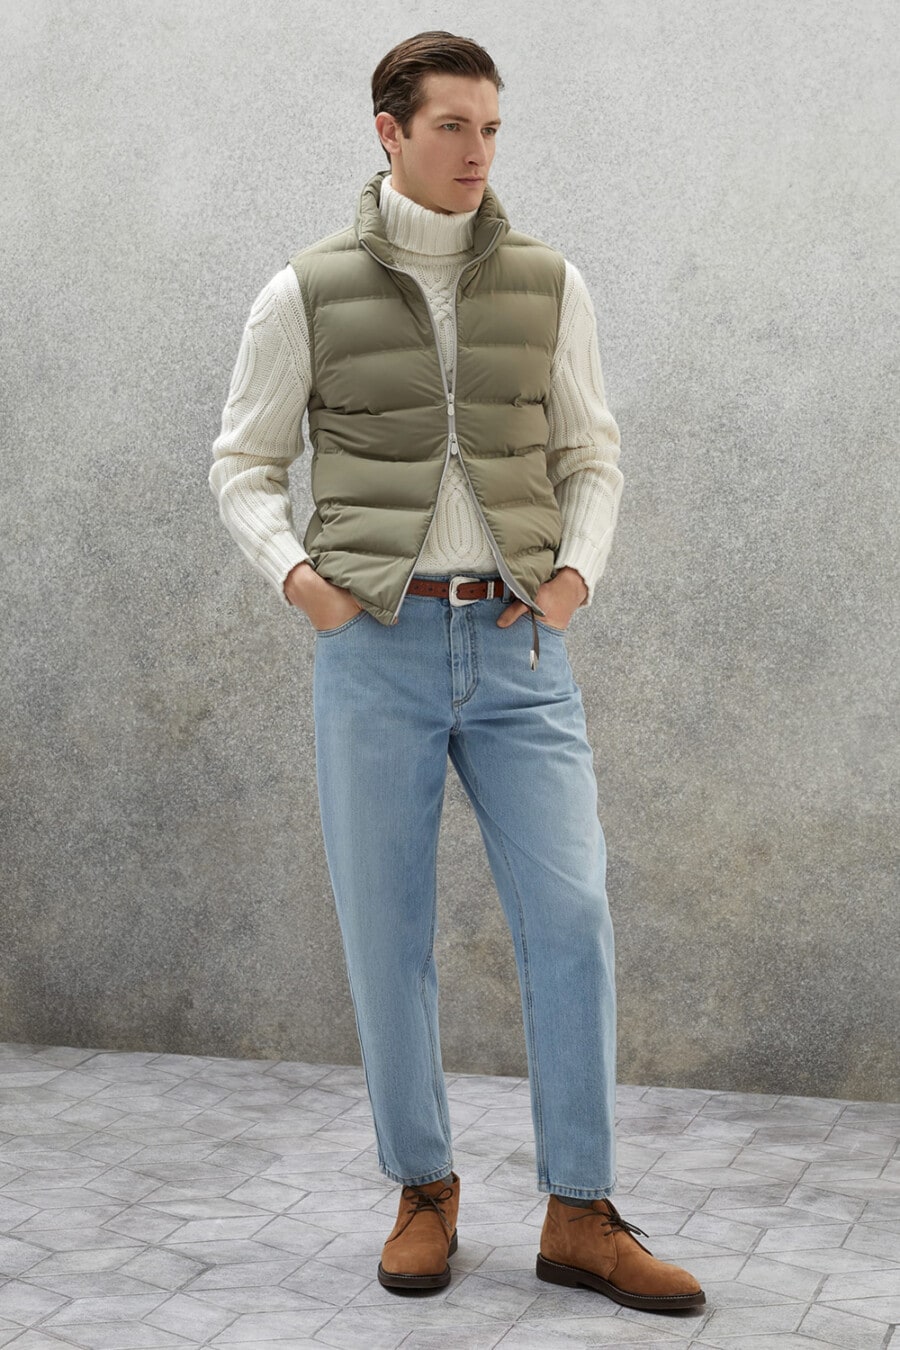 Men's light wash jeans, white chunky turtleneck, green puffer best and brown suede chukka boots outfit